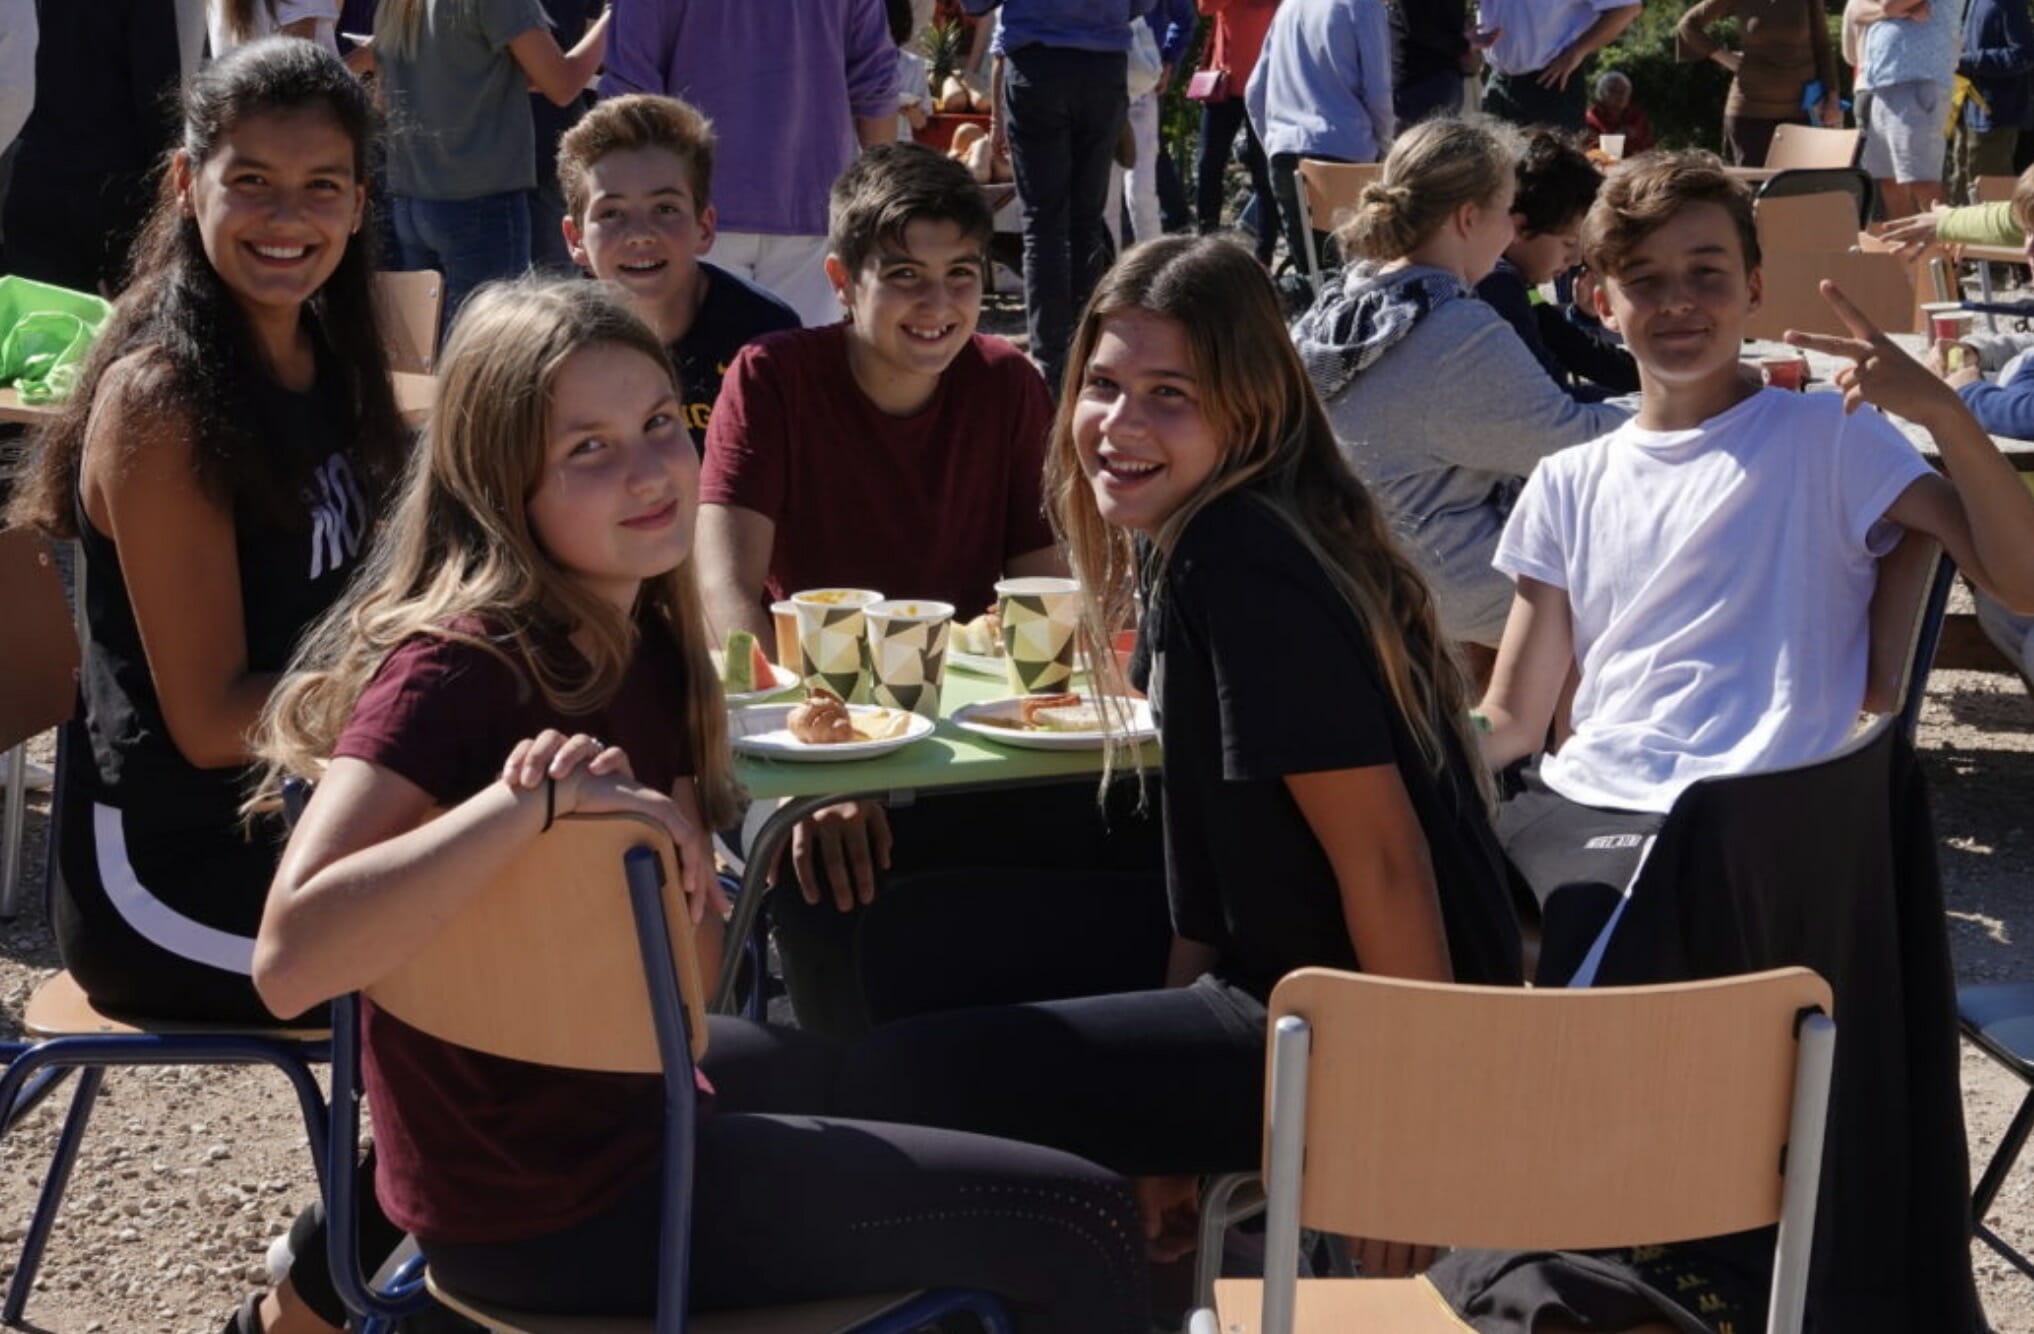 Happy AIS students having lunch at an outdoor school community event